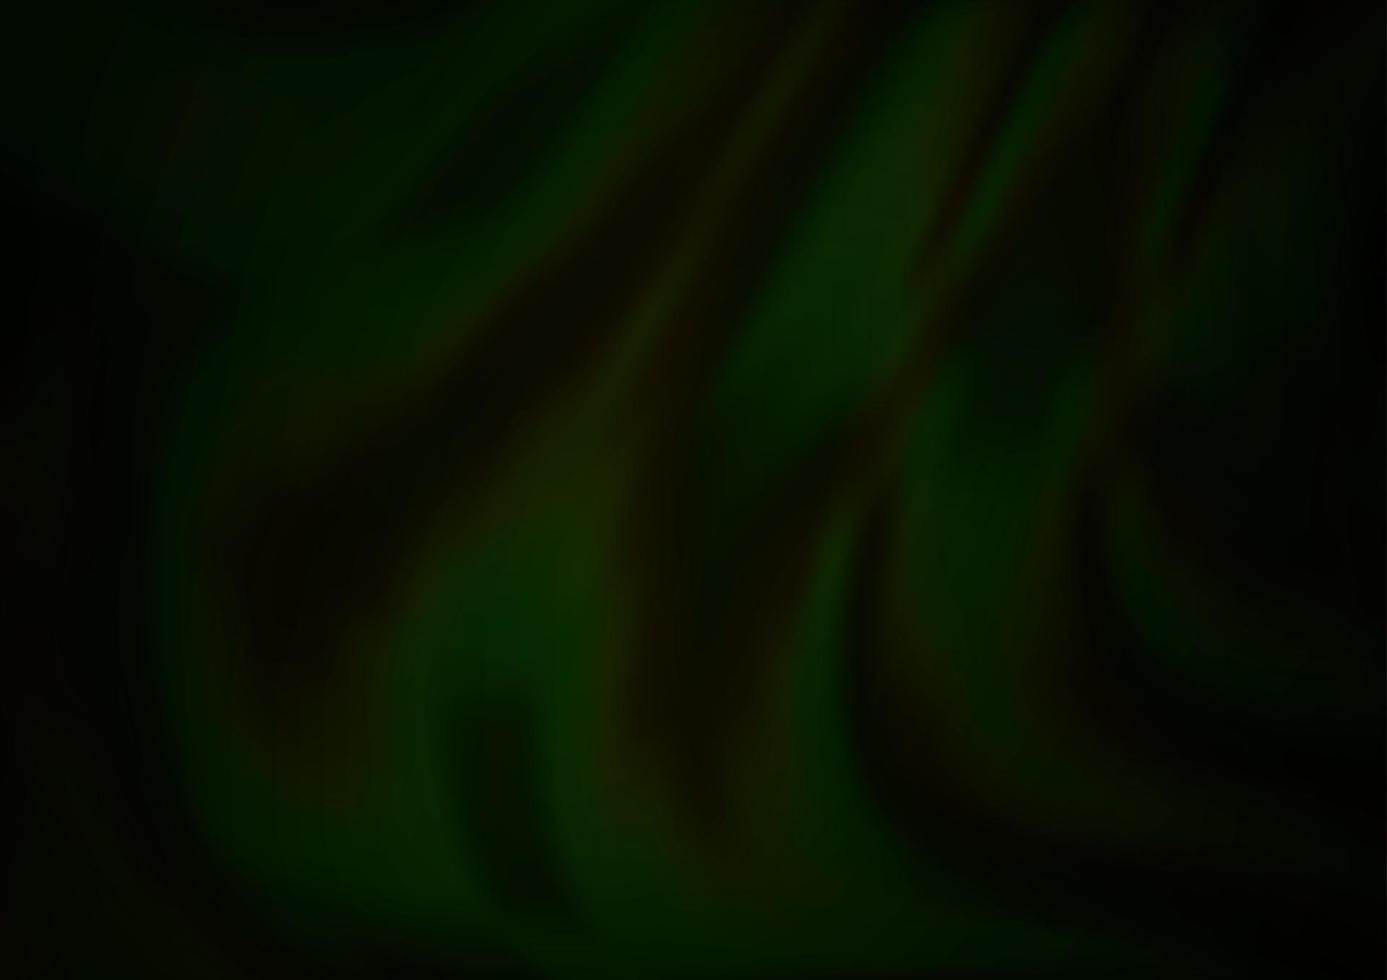 Dark Green vector background with liquid shapes.